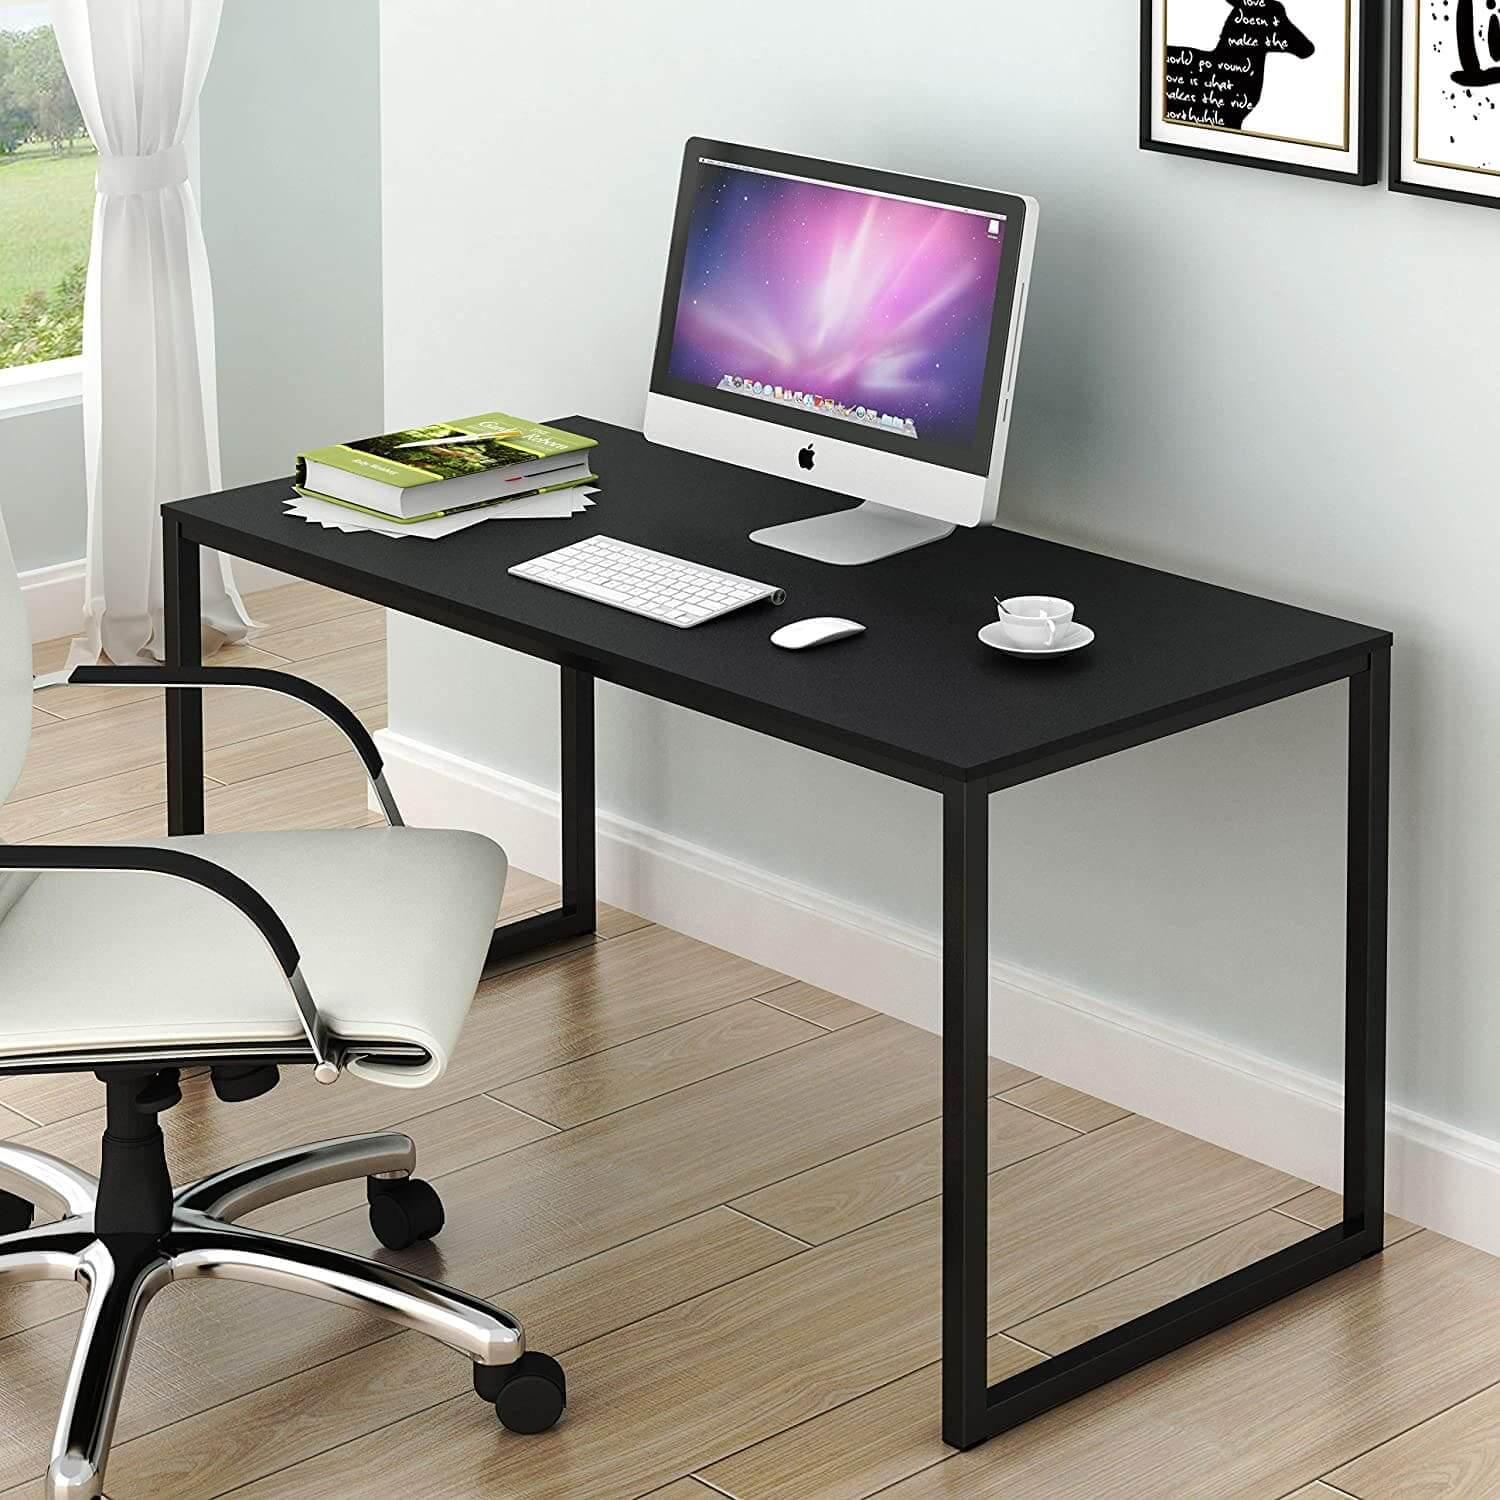 Find the Best Student Desk for Your Needs